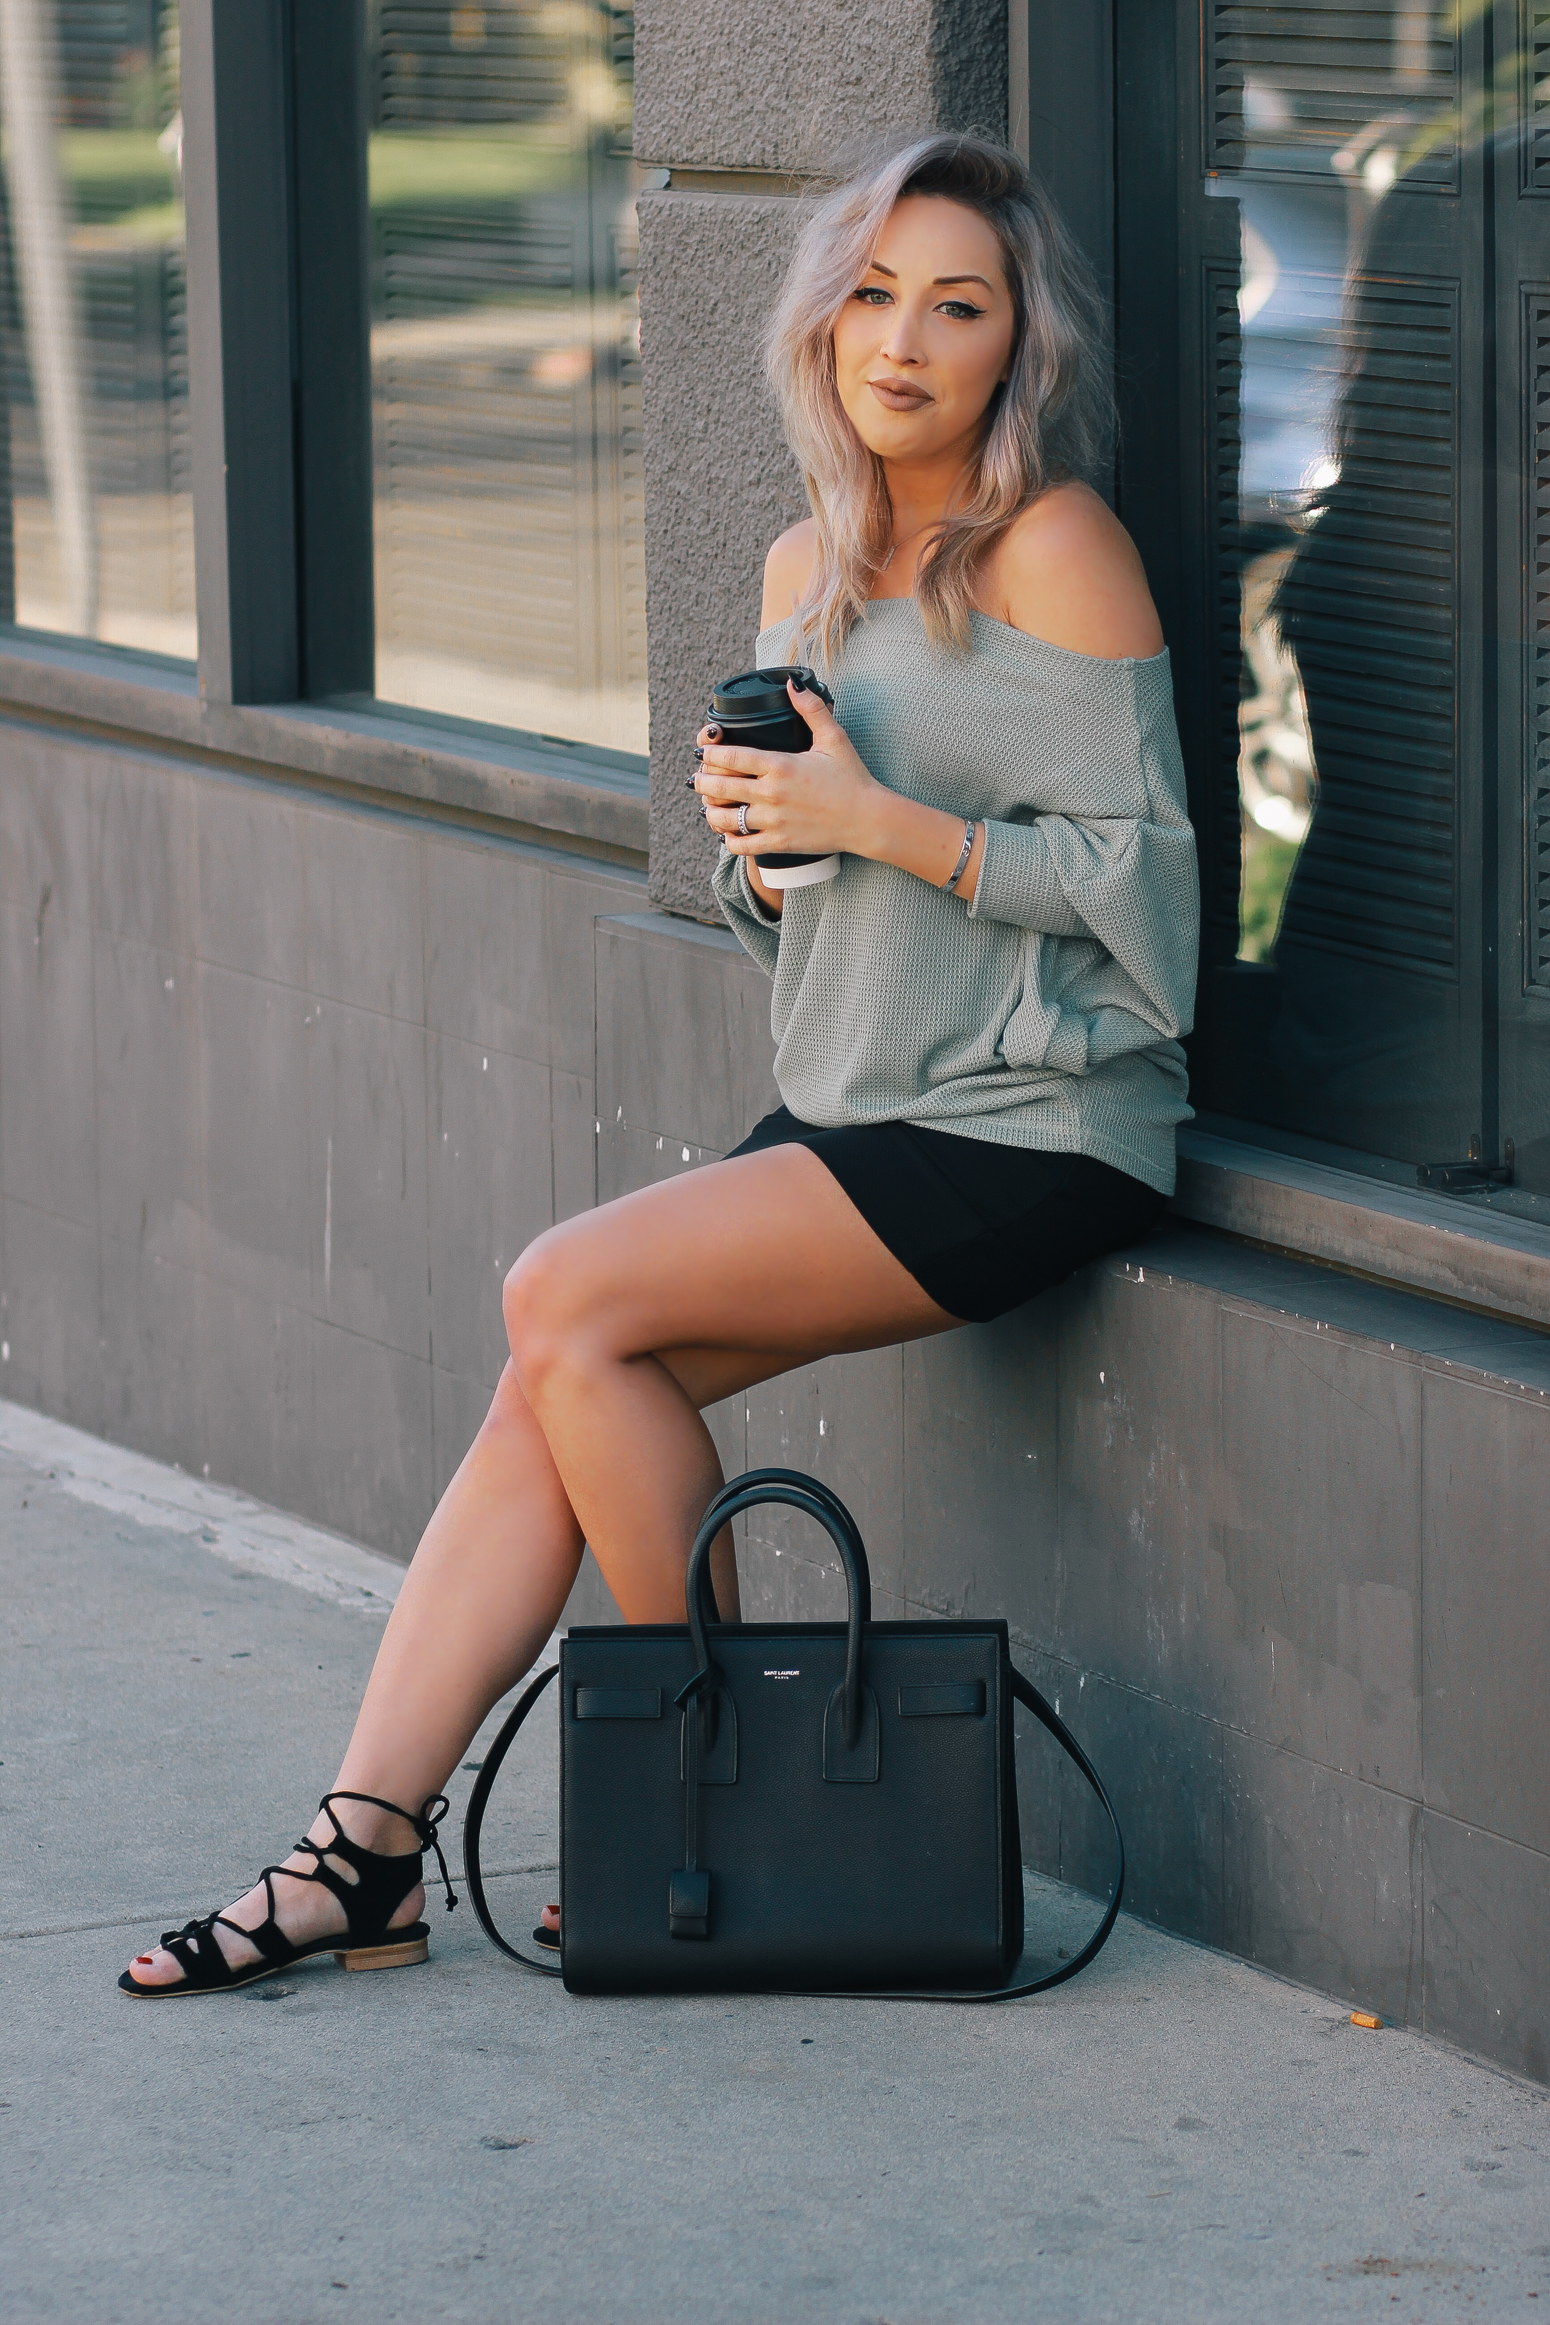 Blondie in the City | Off The Shoulder Top | YSL Bag